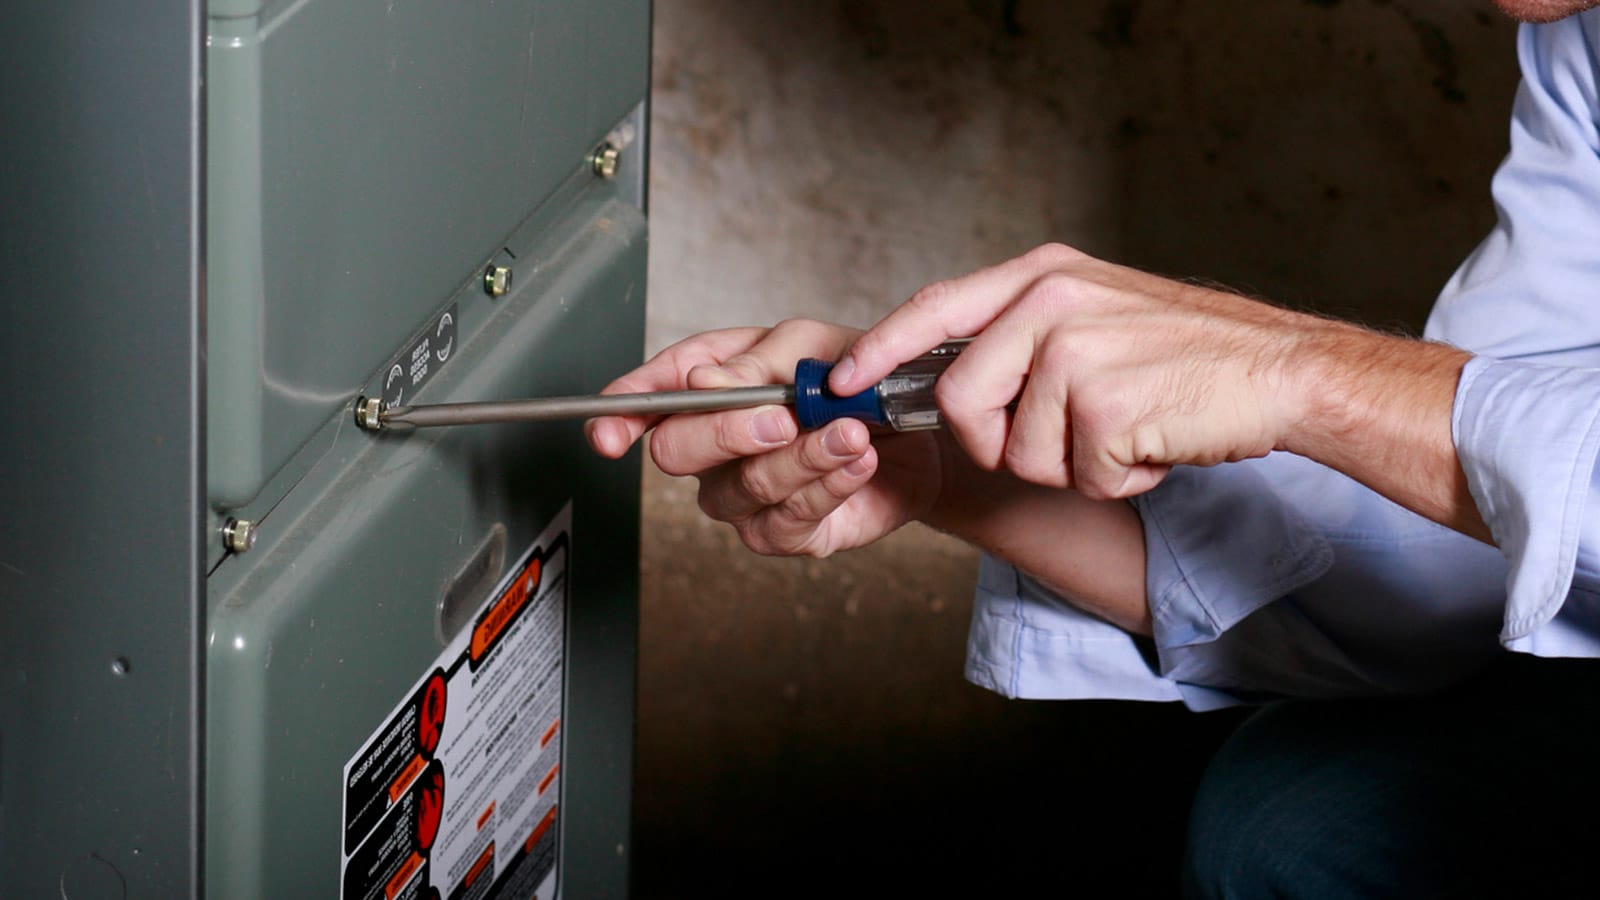 Our plumber uses a screwdriver to attach the faceplate of this gas furnace, completing its installation.